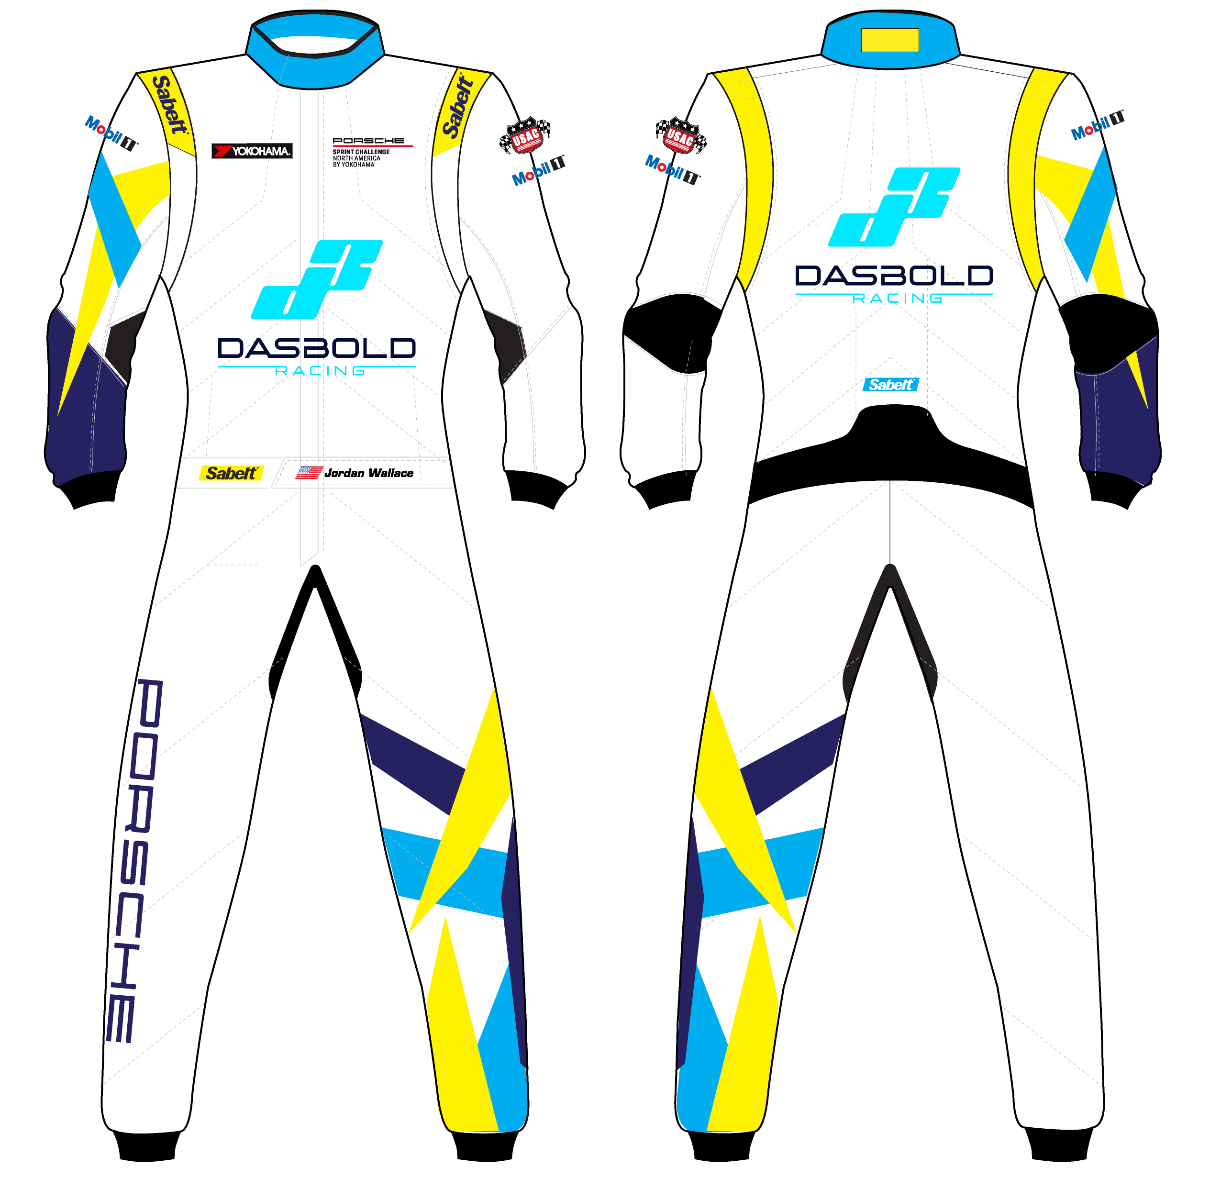 Sabelt TS-10 Race Suit Custom Design affordable best deal and lowest price after discount unlimited colors